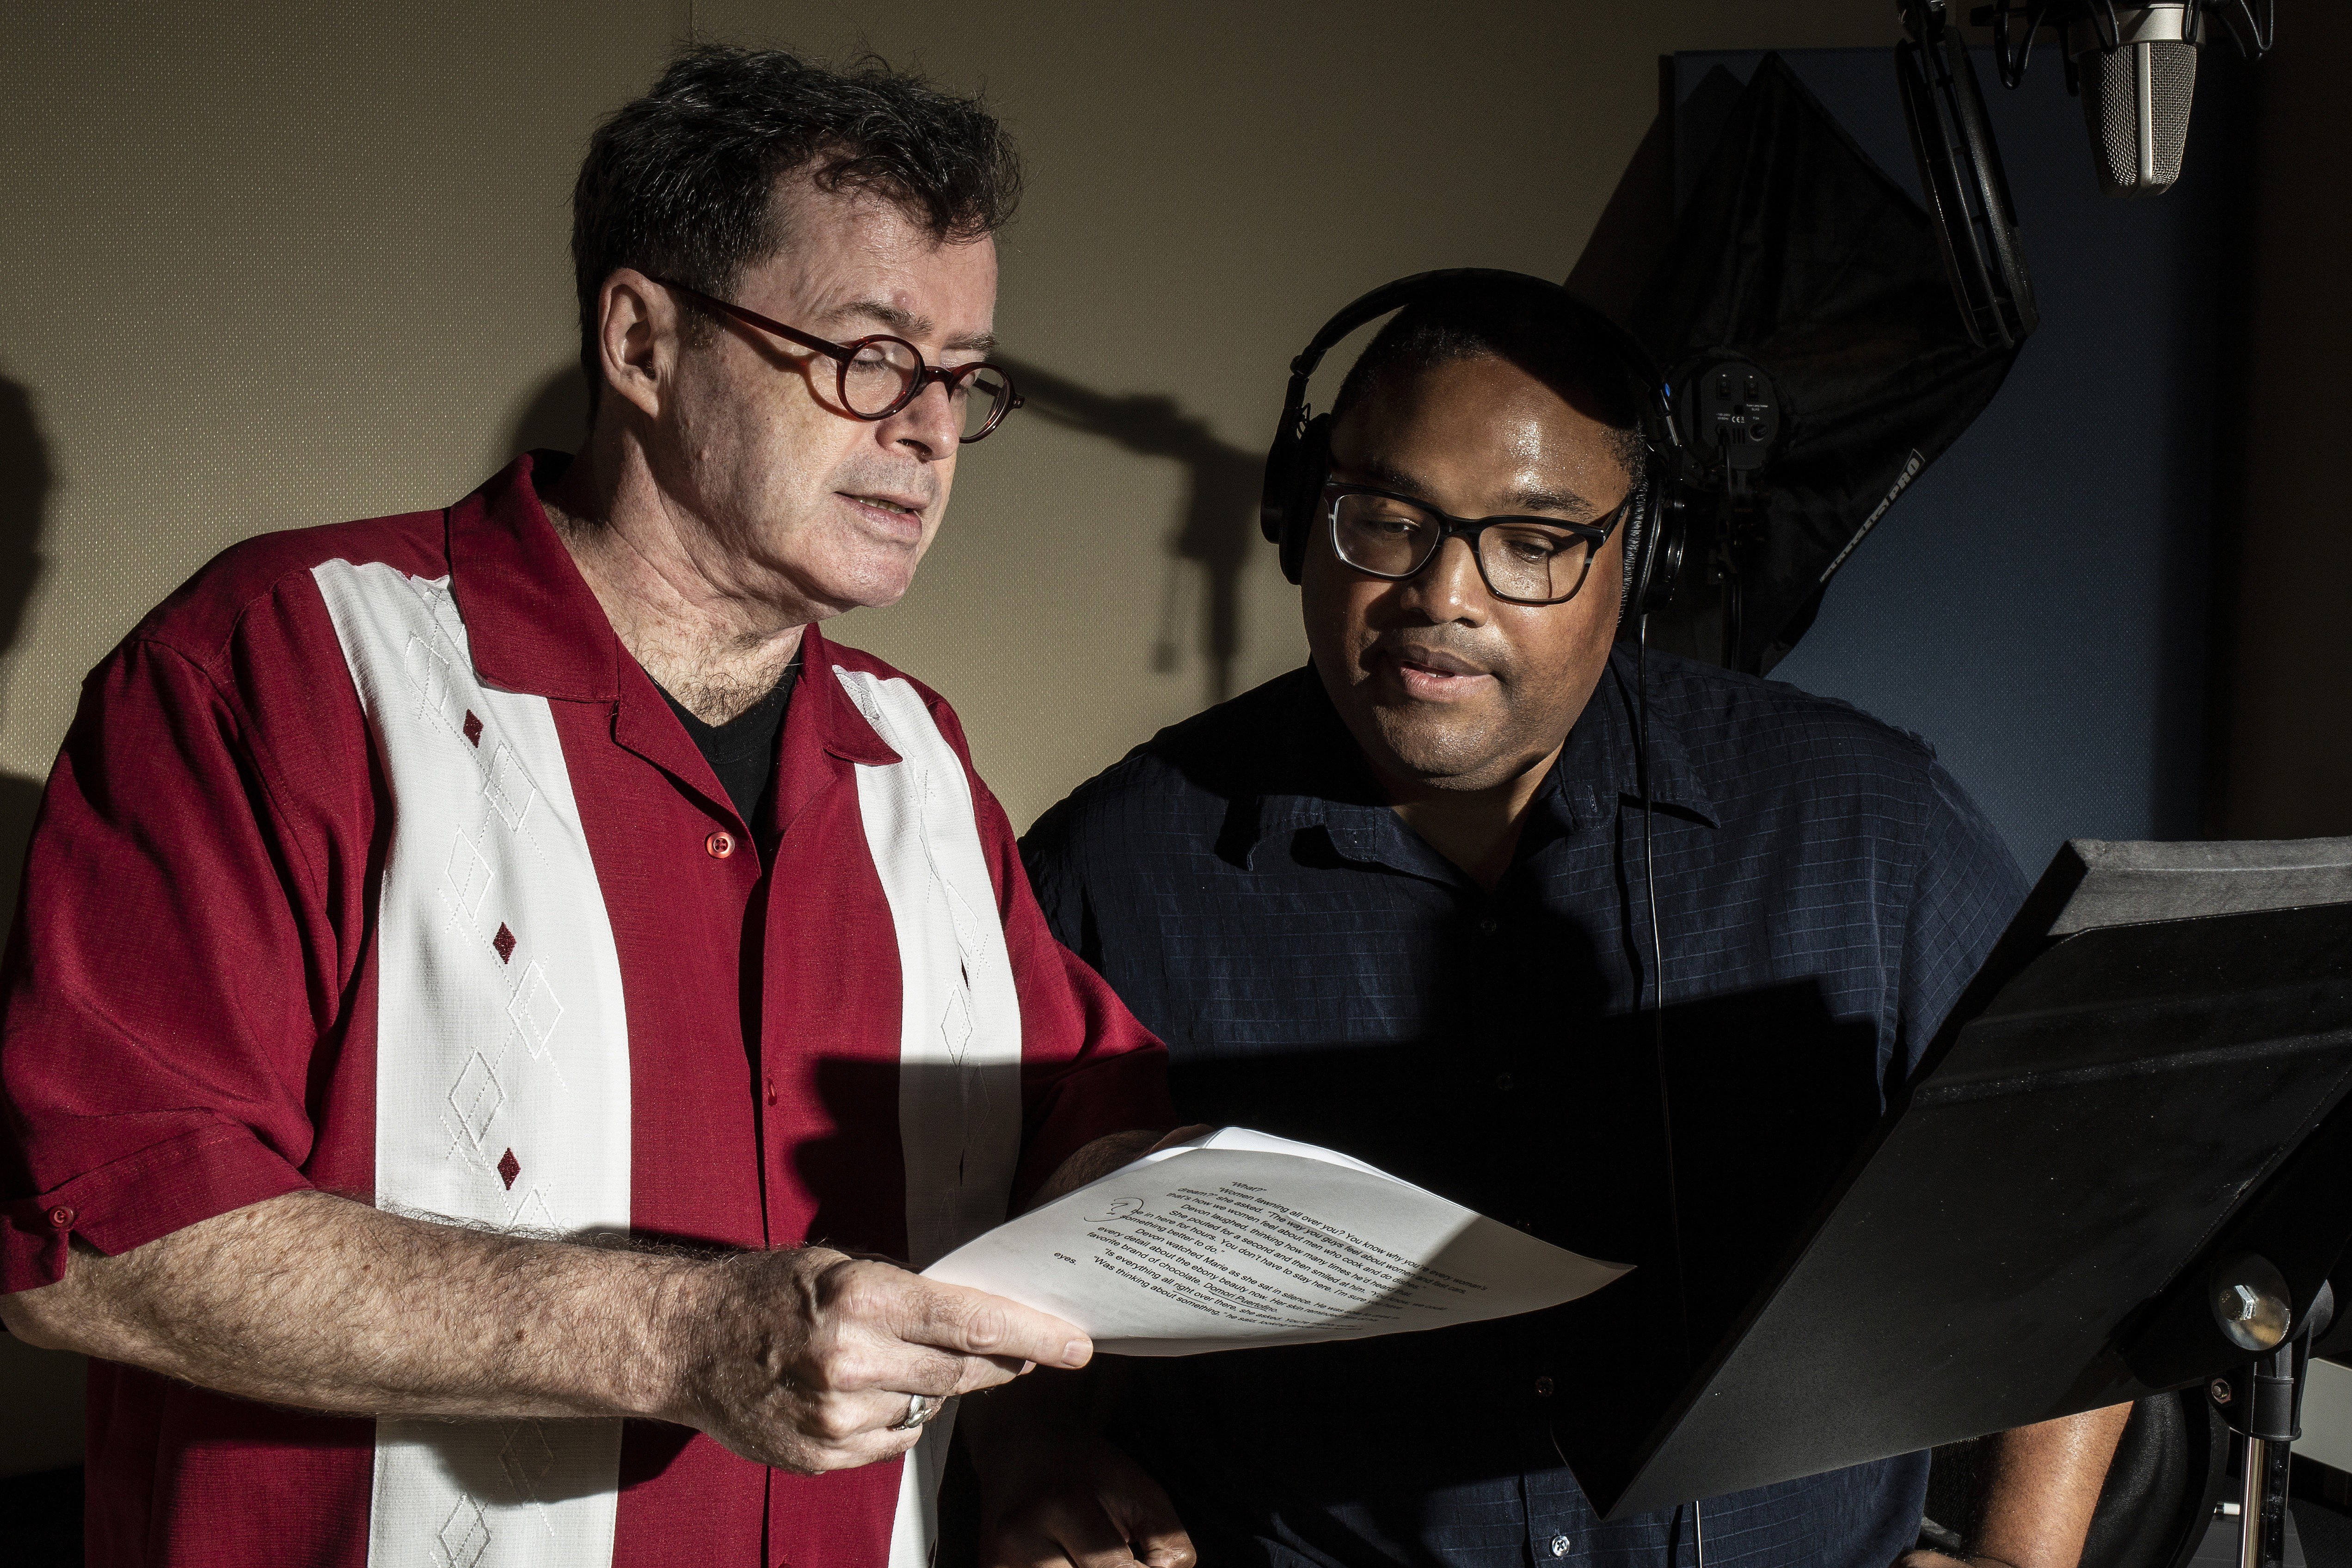 Voice actor and instructor Johnny Heller (left) offers tips to voice actor David McKeel during a recording session at Edge Studio in New York. Photo: The Washington Post/Bryan Anselm